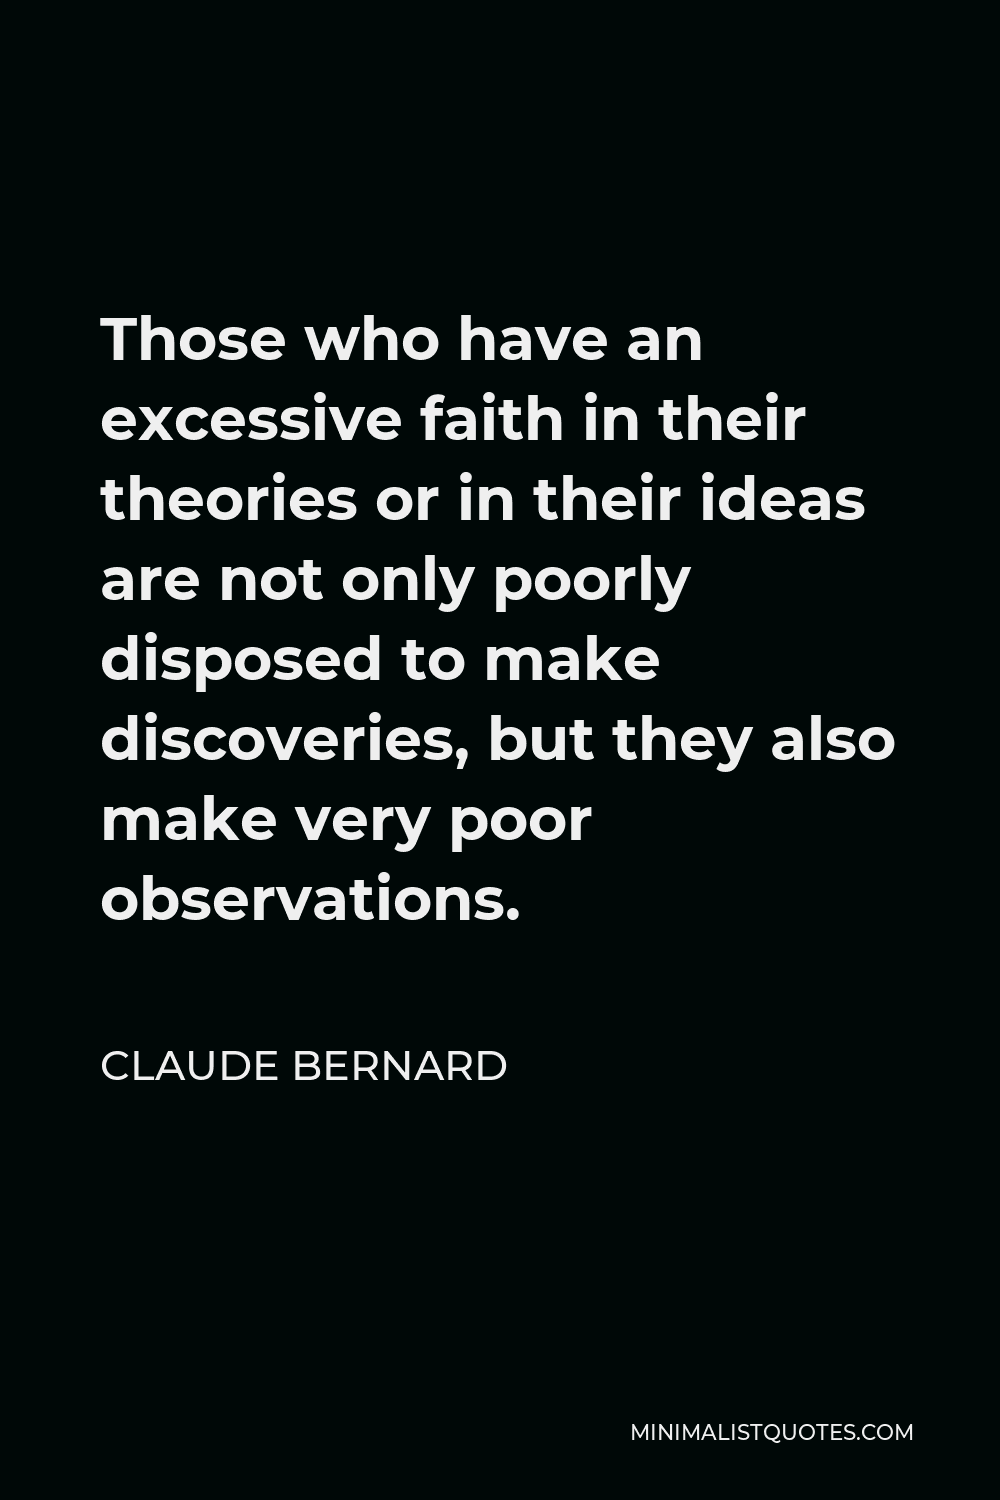 Claude Bernard Quote - Those who have an excessive faith in their theories or in their ideas are not only poorly disposed to make discoveries, but they also make very poor observations.